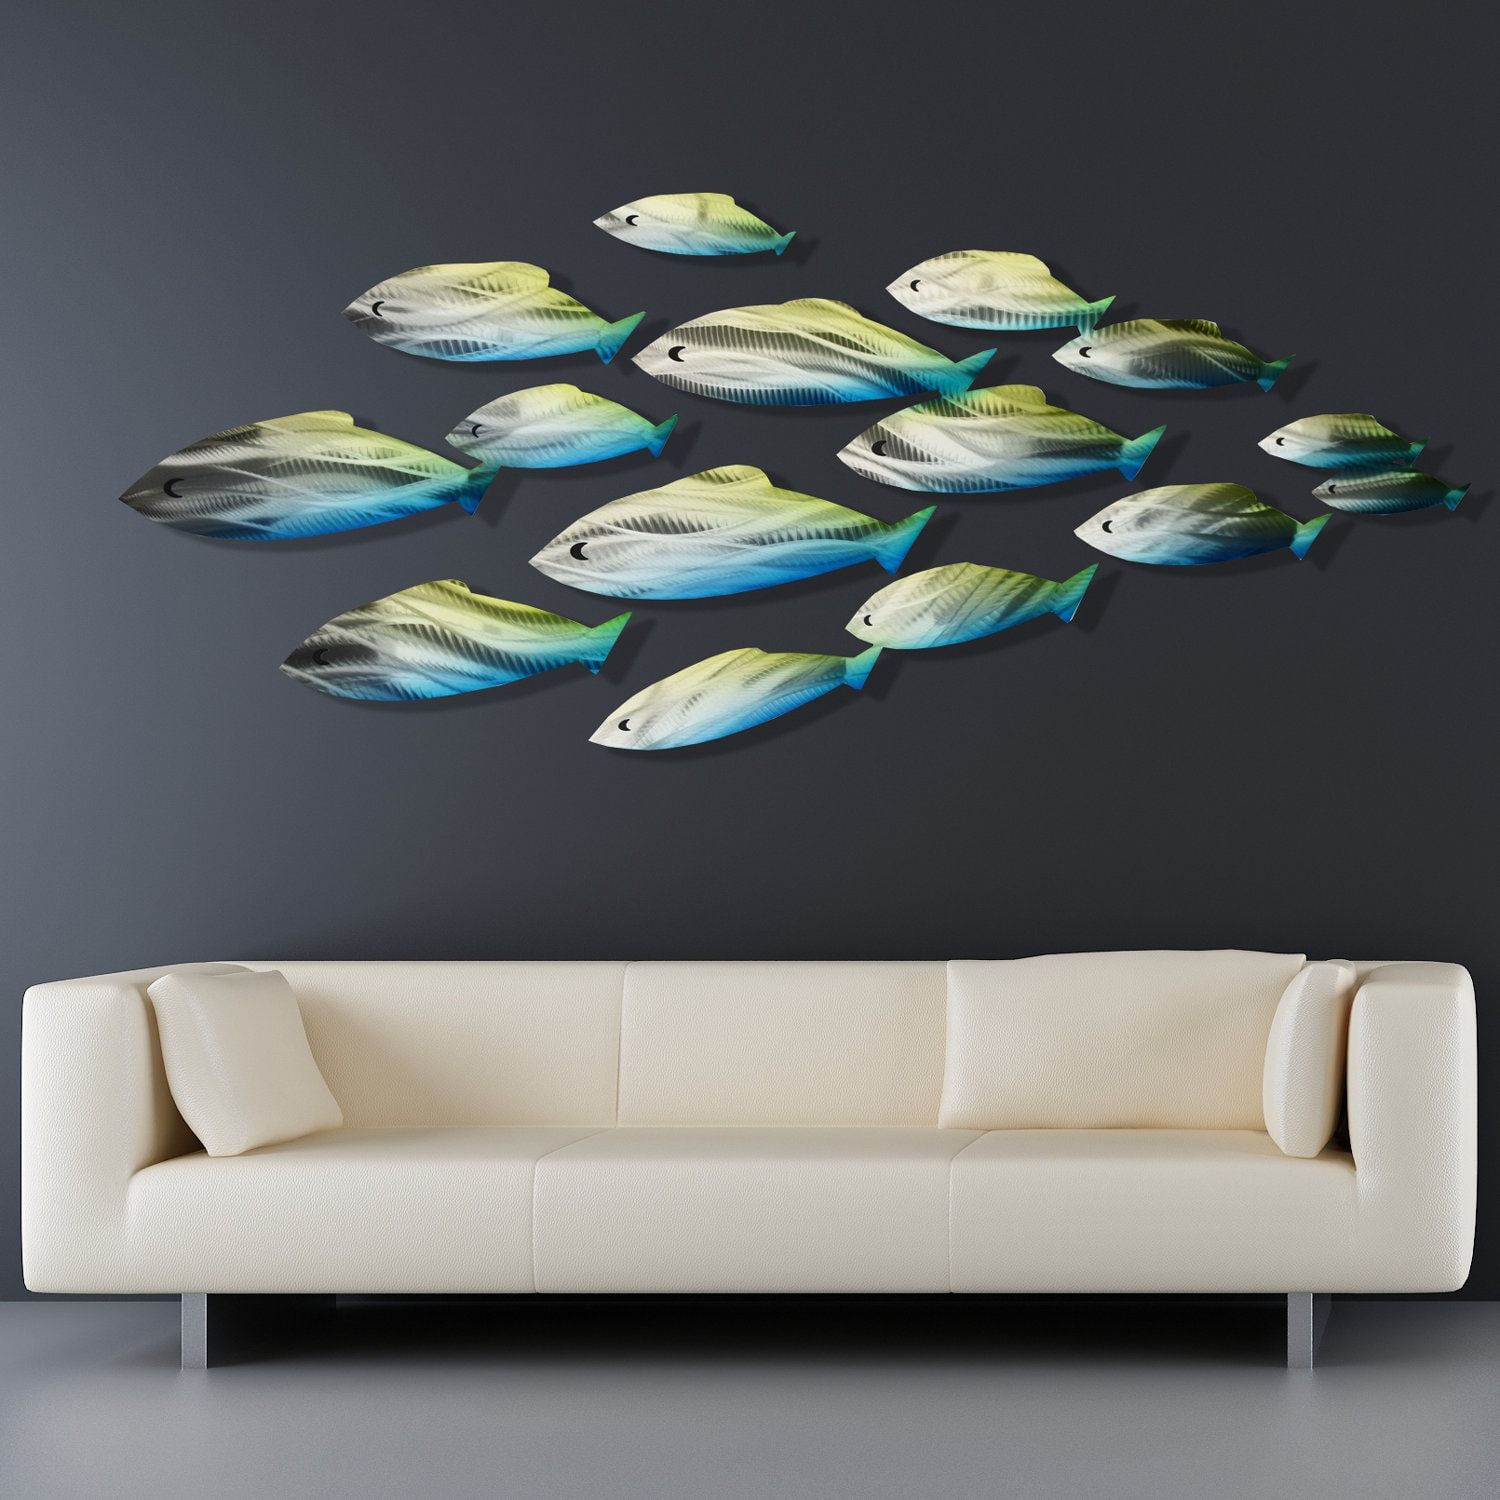 Large Metal School Of Fish Wall Art Sculpture Tropical – Etsy Intended For 2017 Metal Coastal Ocean Wall Art (View 12 of 20)